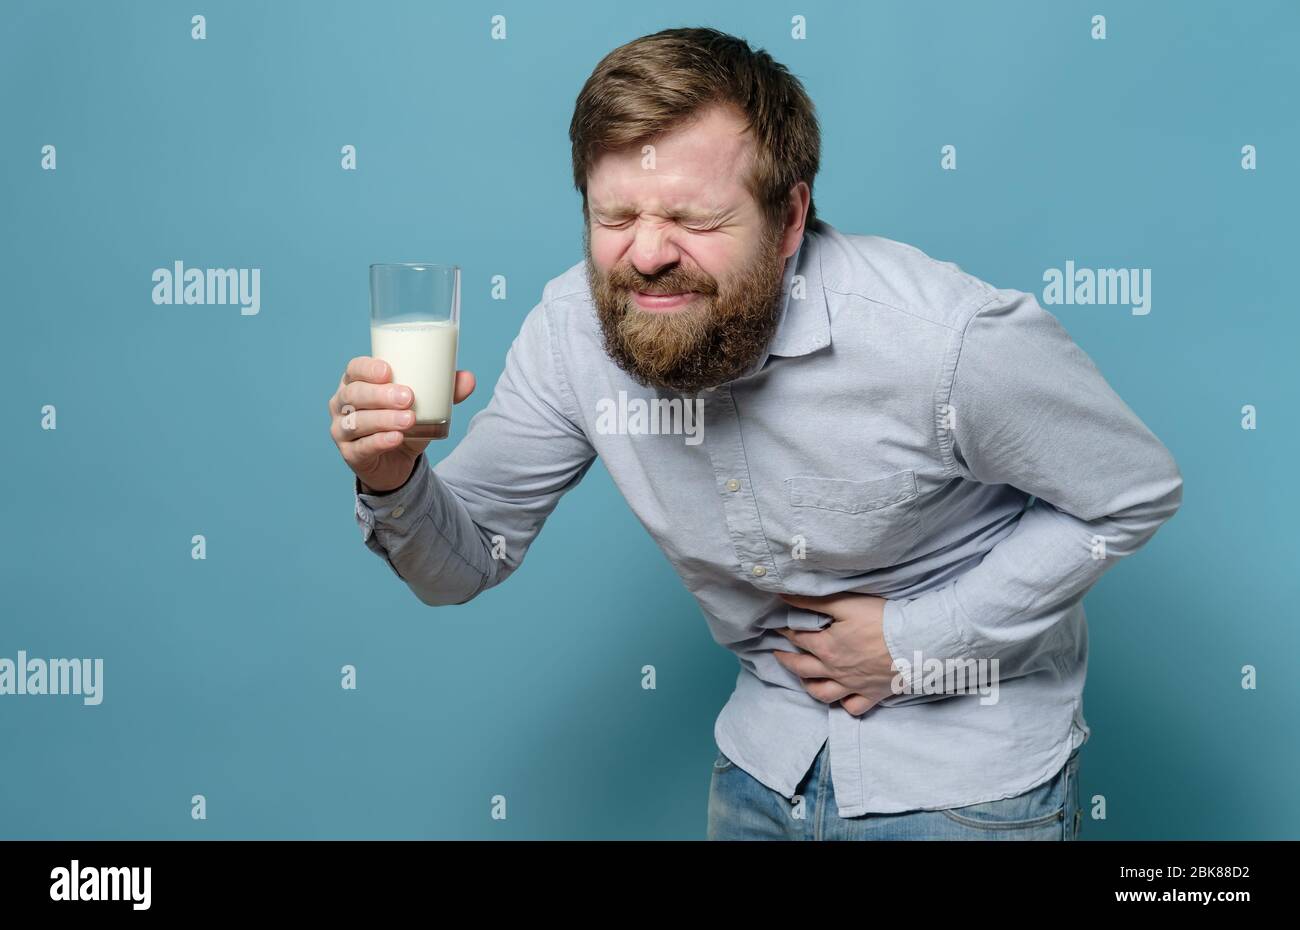 Lactose intolerance. Caucasian man holds a glass of milk in hand and suffers from severe pain in stomach, on a blue background. Stock Photo